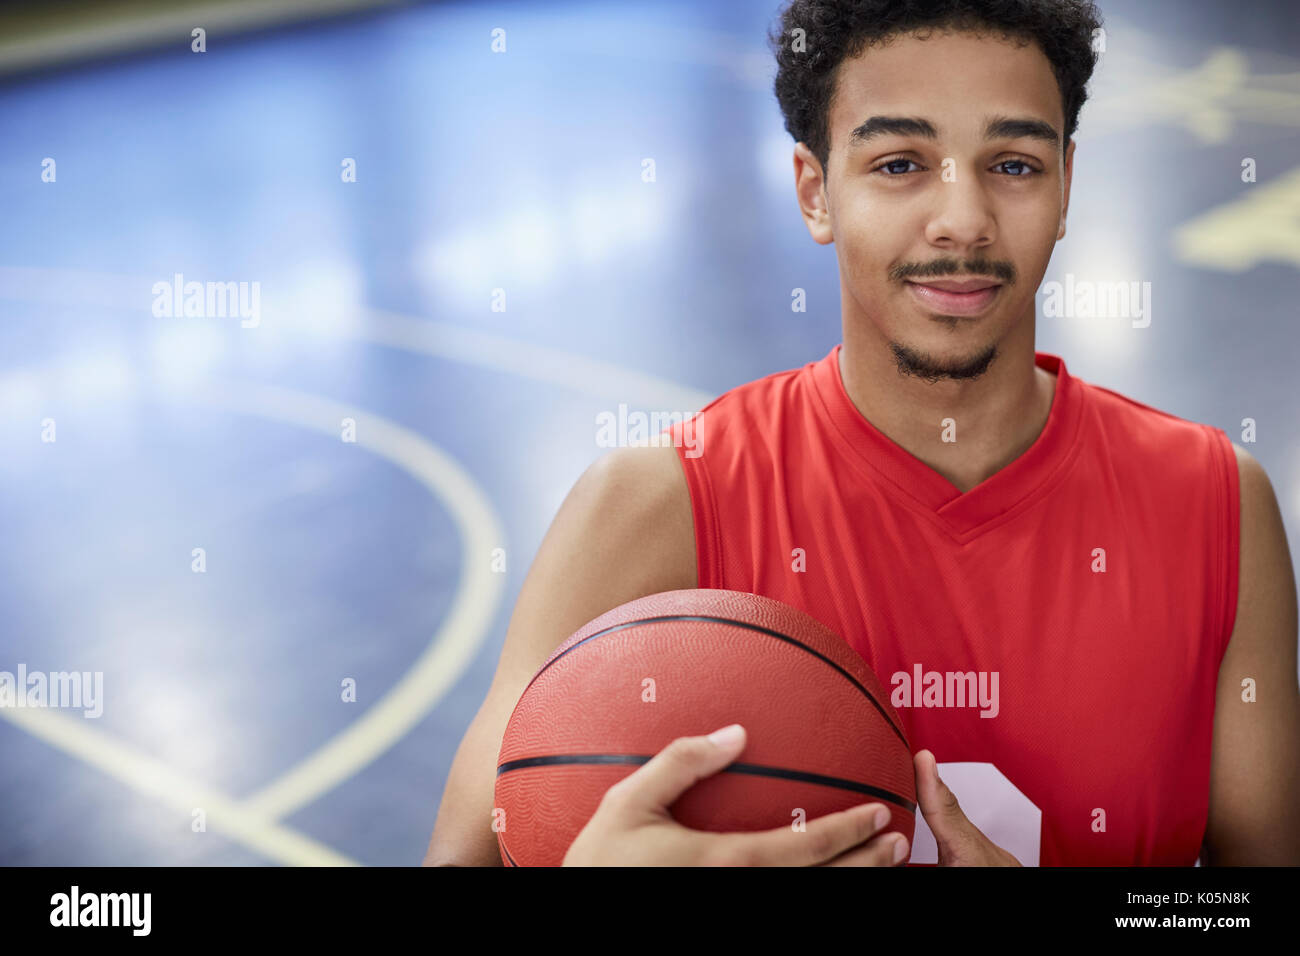 Portrait confident young male basketball player holding basketball on court Stock Photo